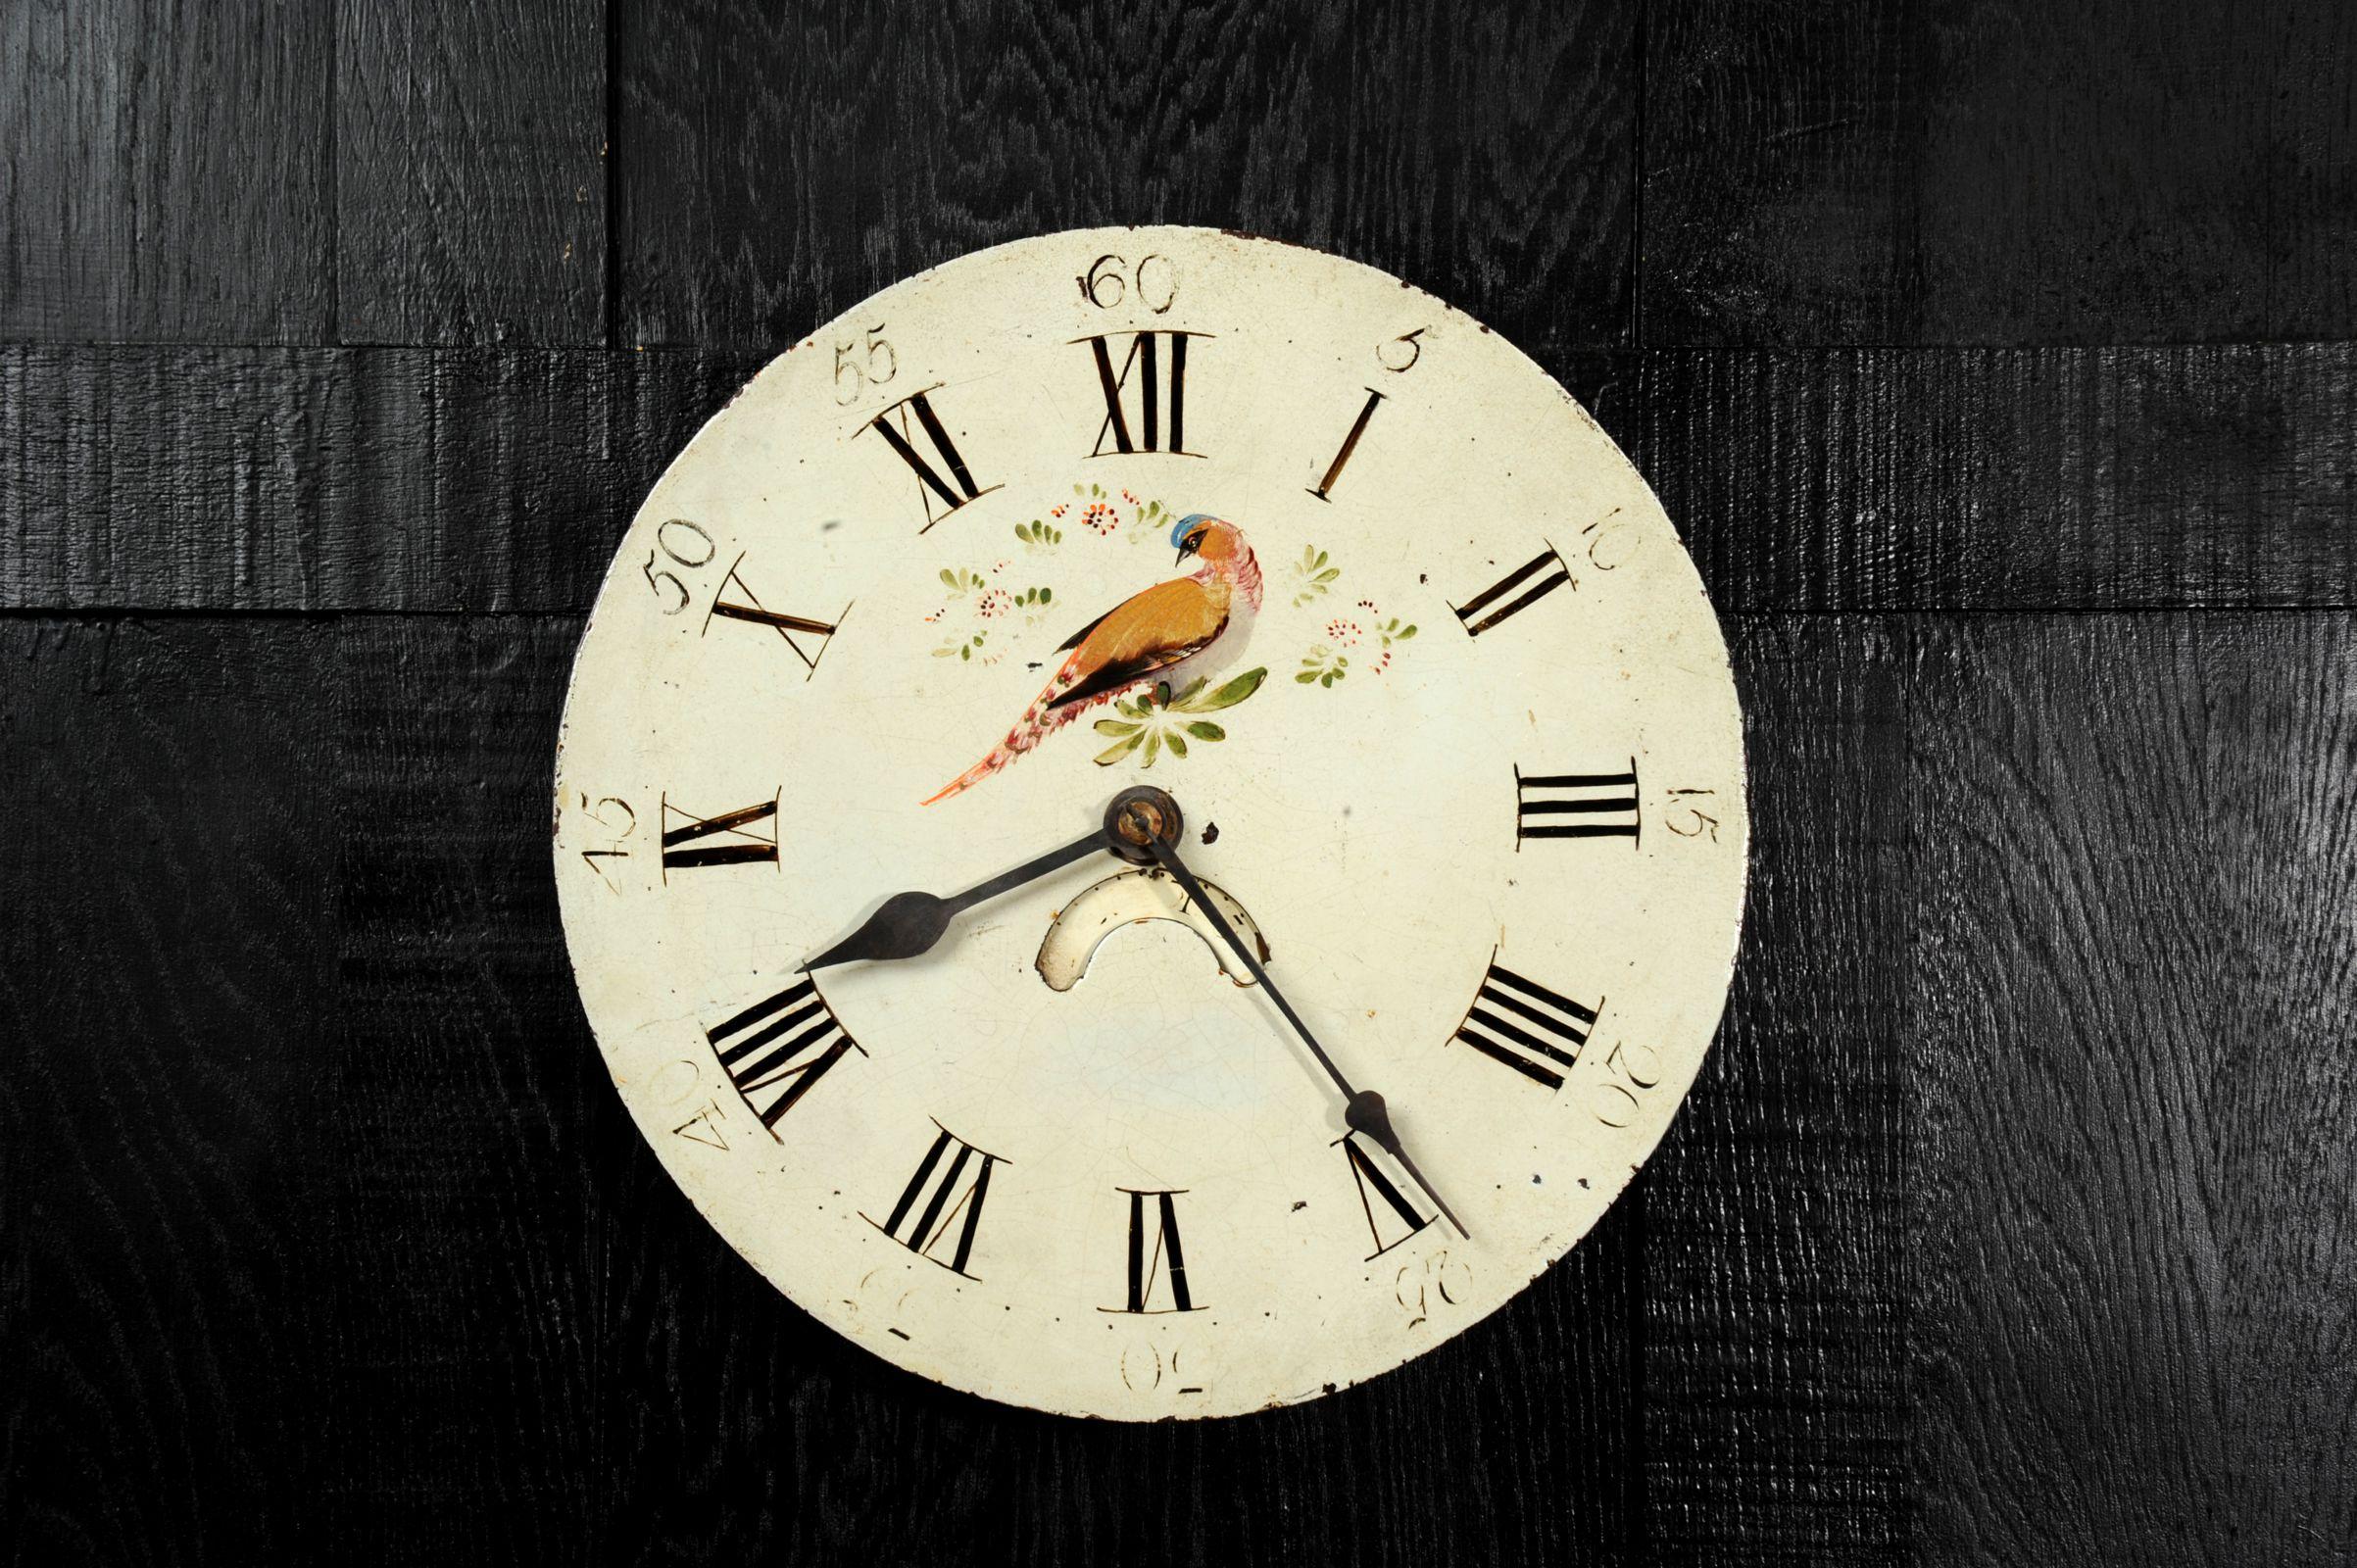 A lovely antique iron clock dial circa 1820 in its original enamel, charmingly decorated with a bird and flowers. With ancient craquelure, marks of a long life and its original handcut blue steel hands, all as found by our buyer in a country house.